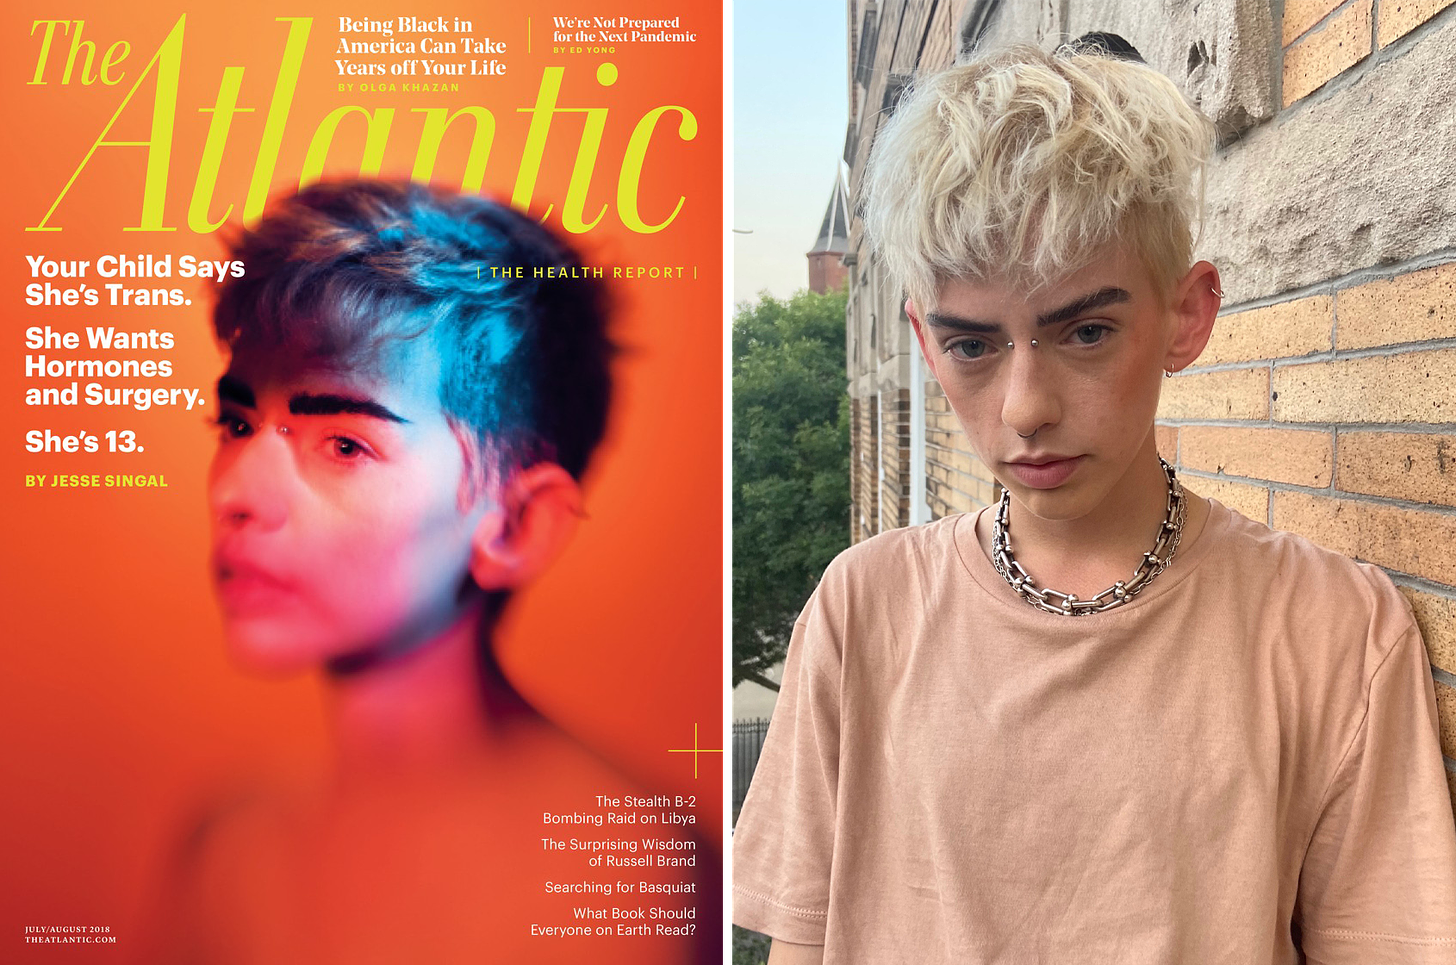 The Atlantic tried to artistically show gender dysphoria on its cover.  Instead it damaged the trust of transgender readers. - Poynter